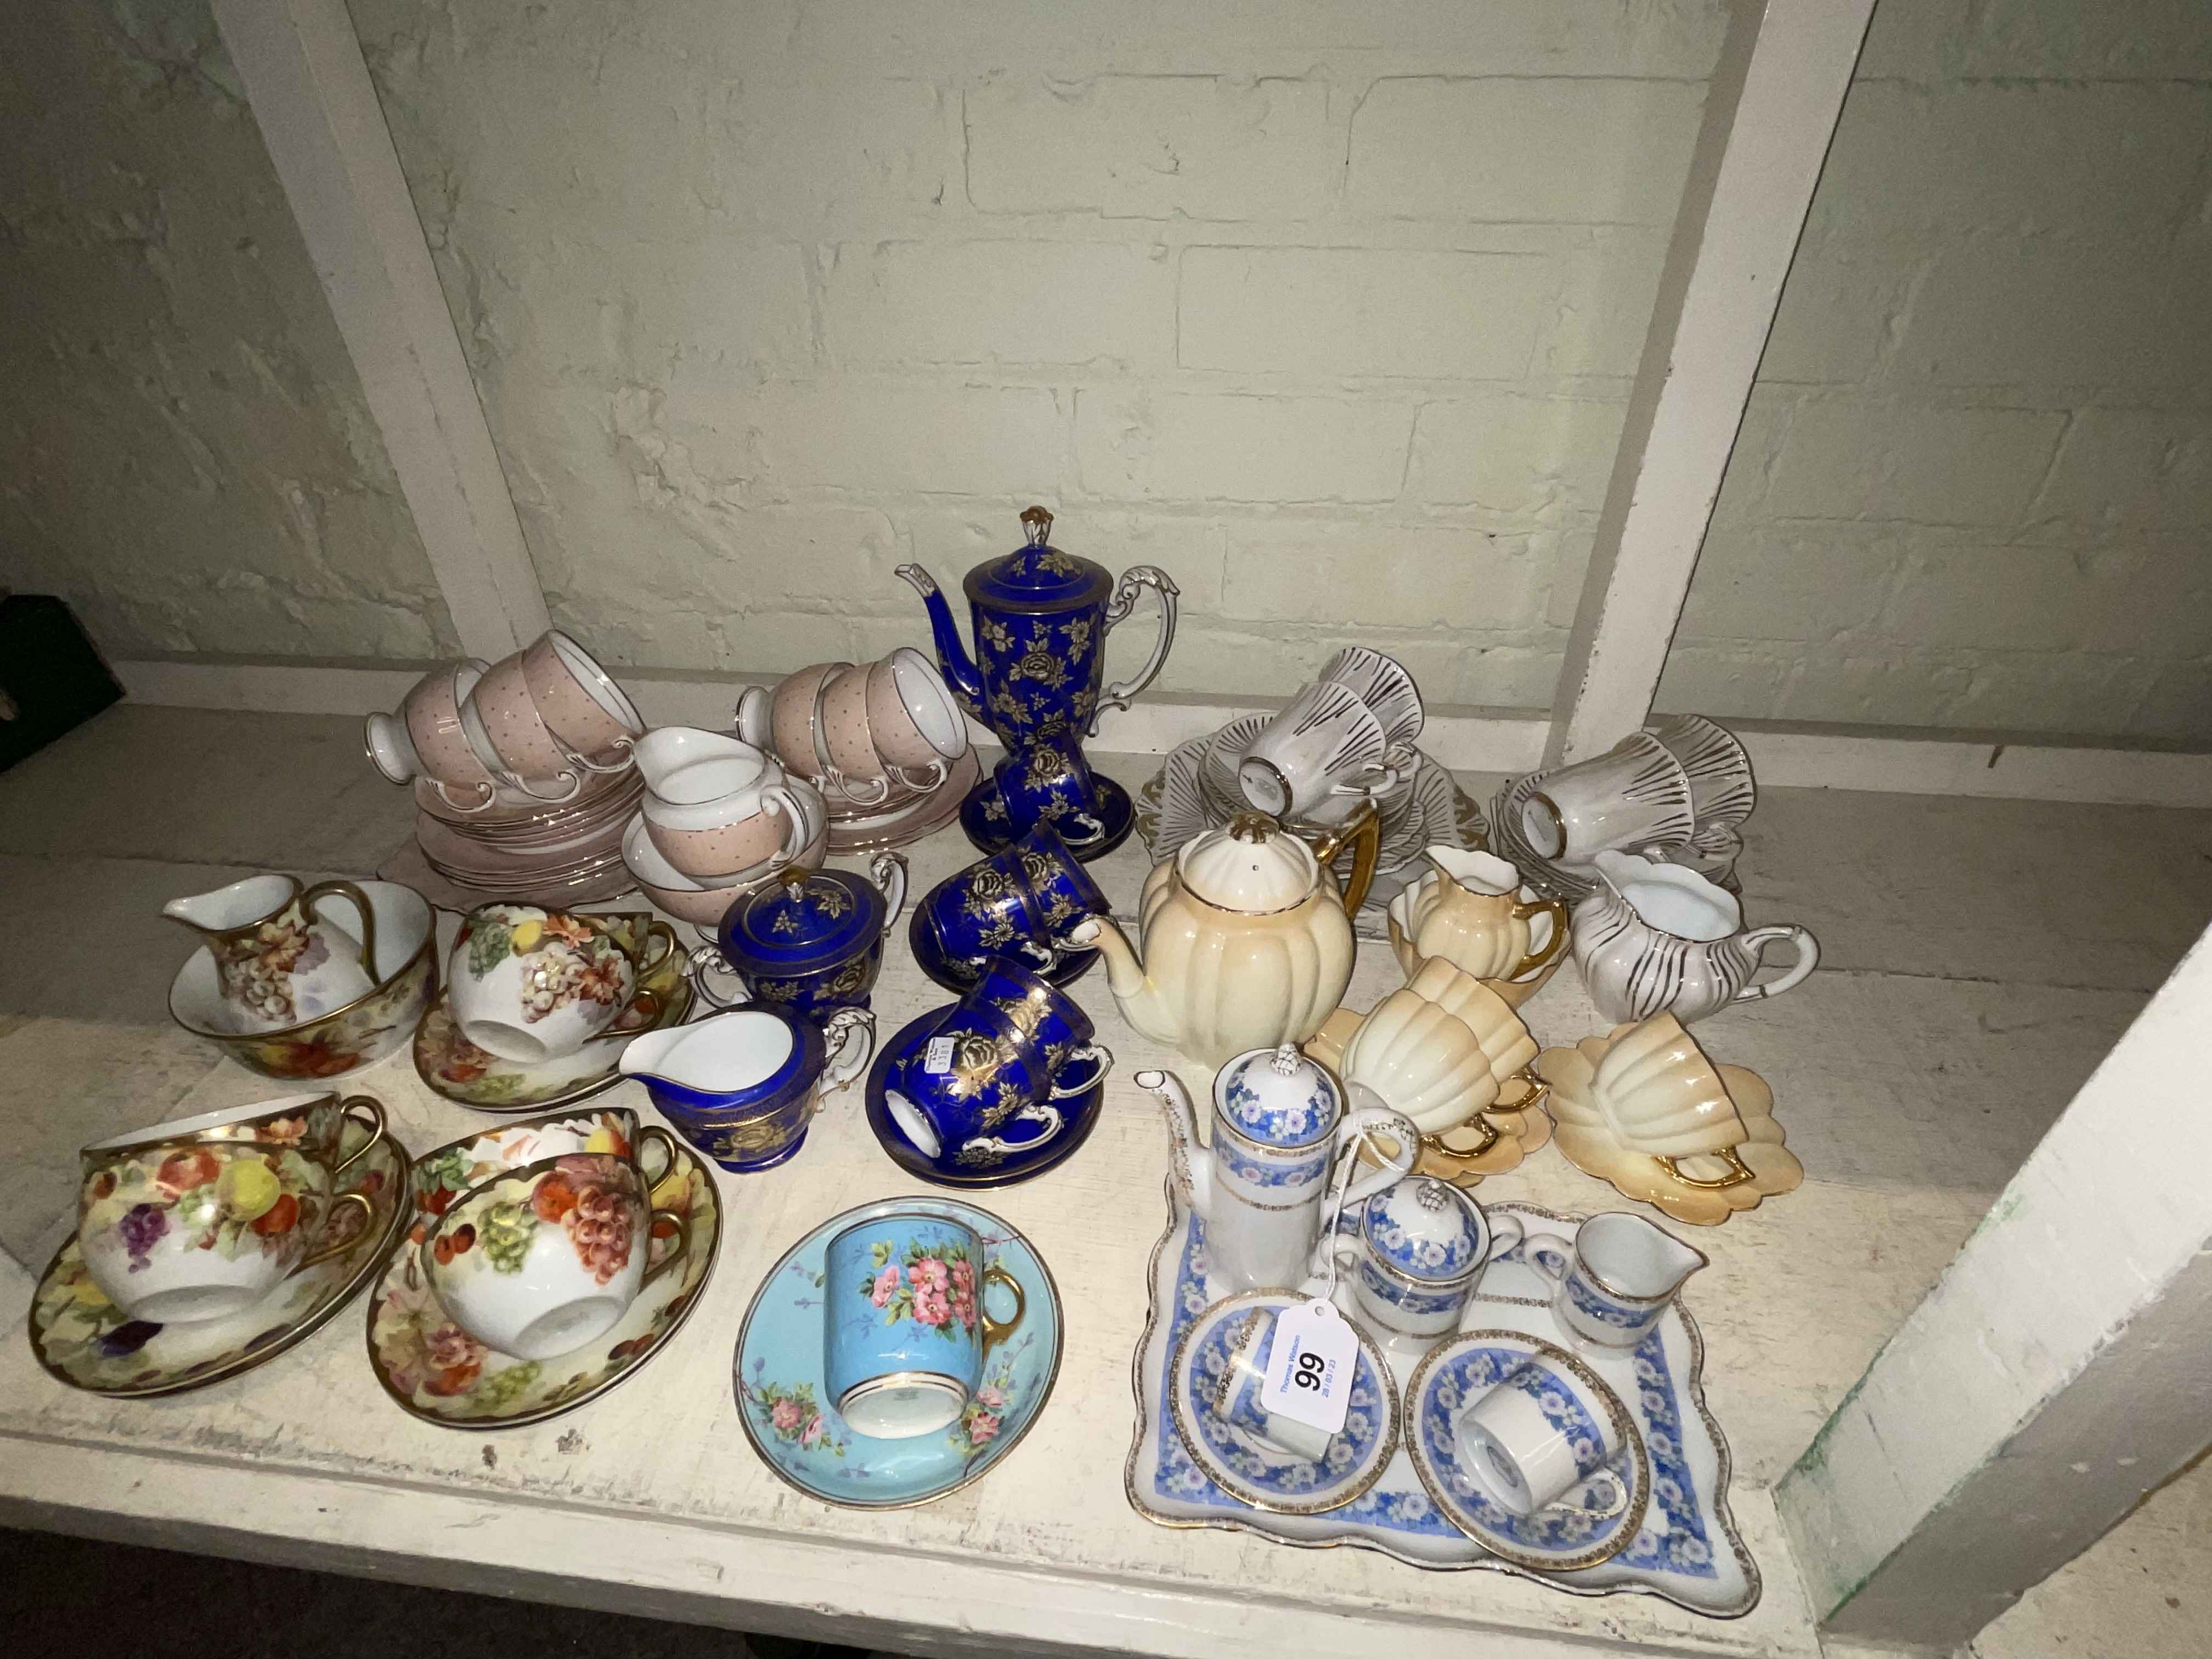 Noritake, Shelley, Royal Standard and other teaware, etc.